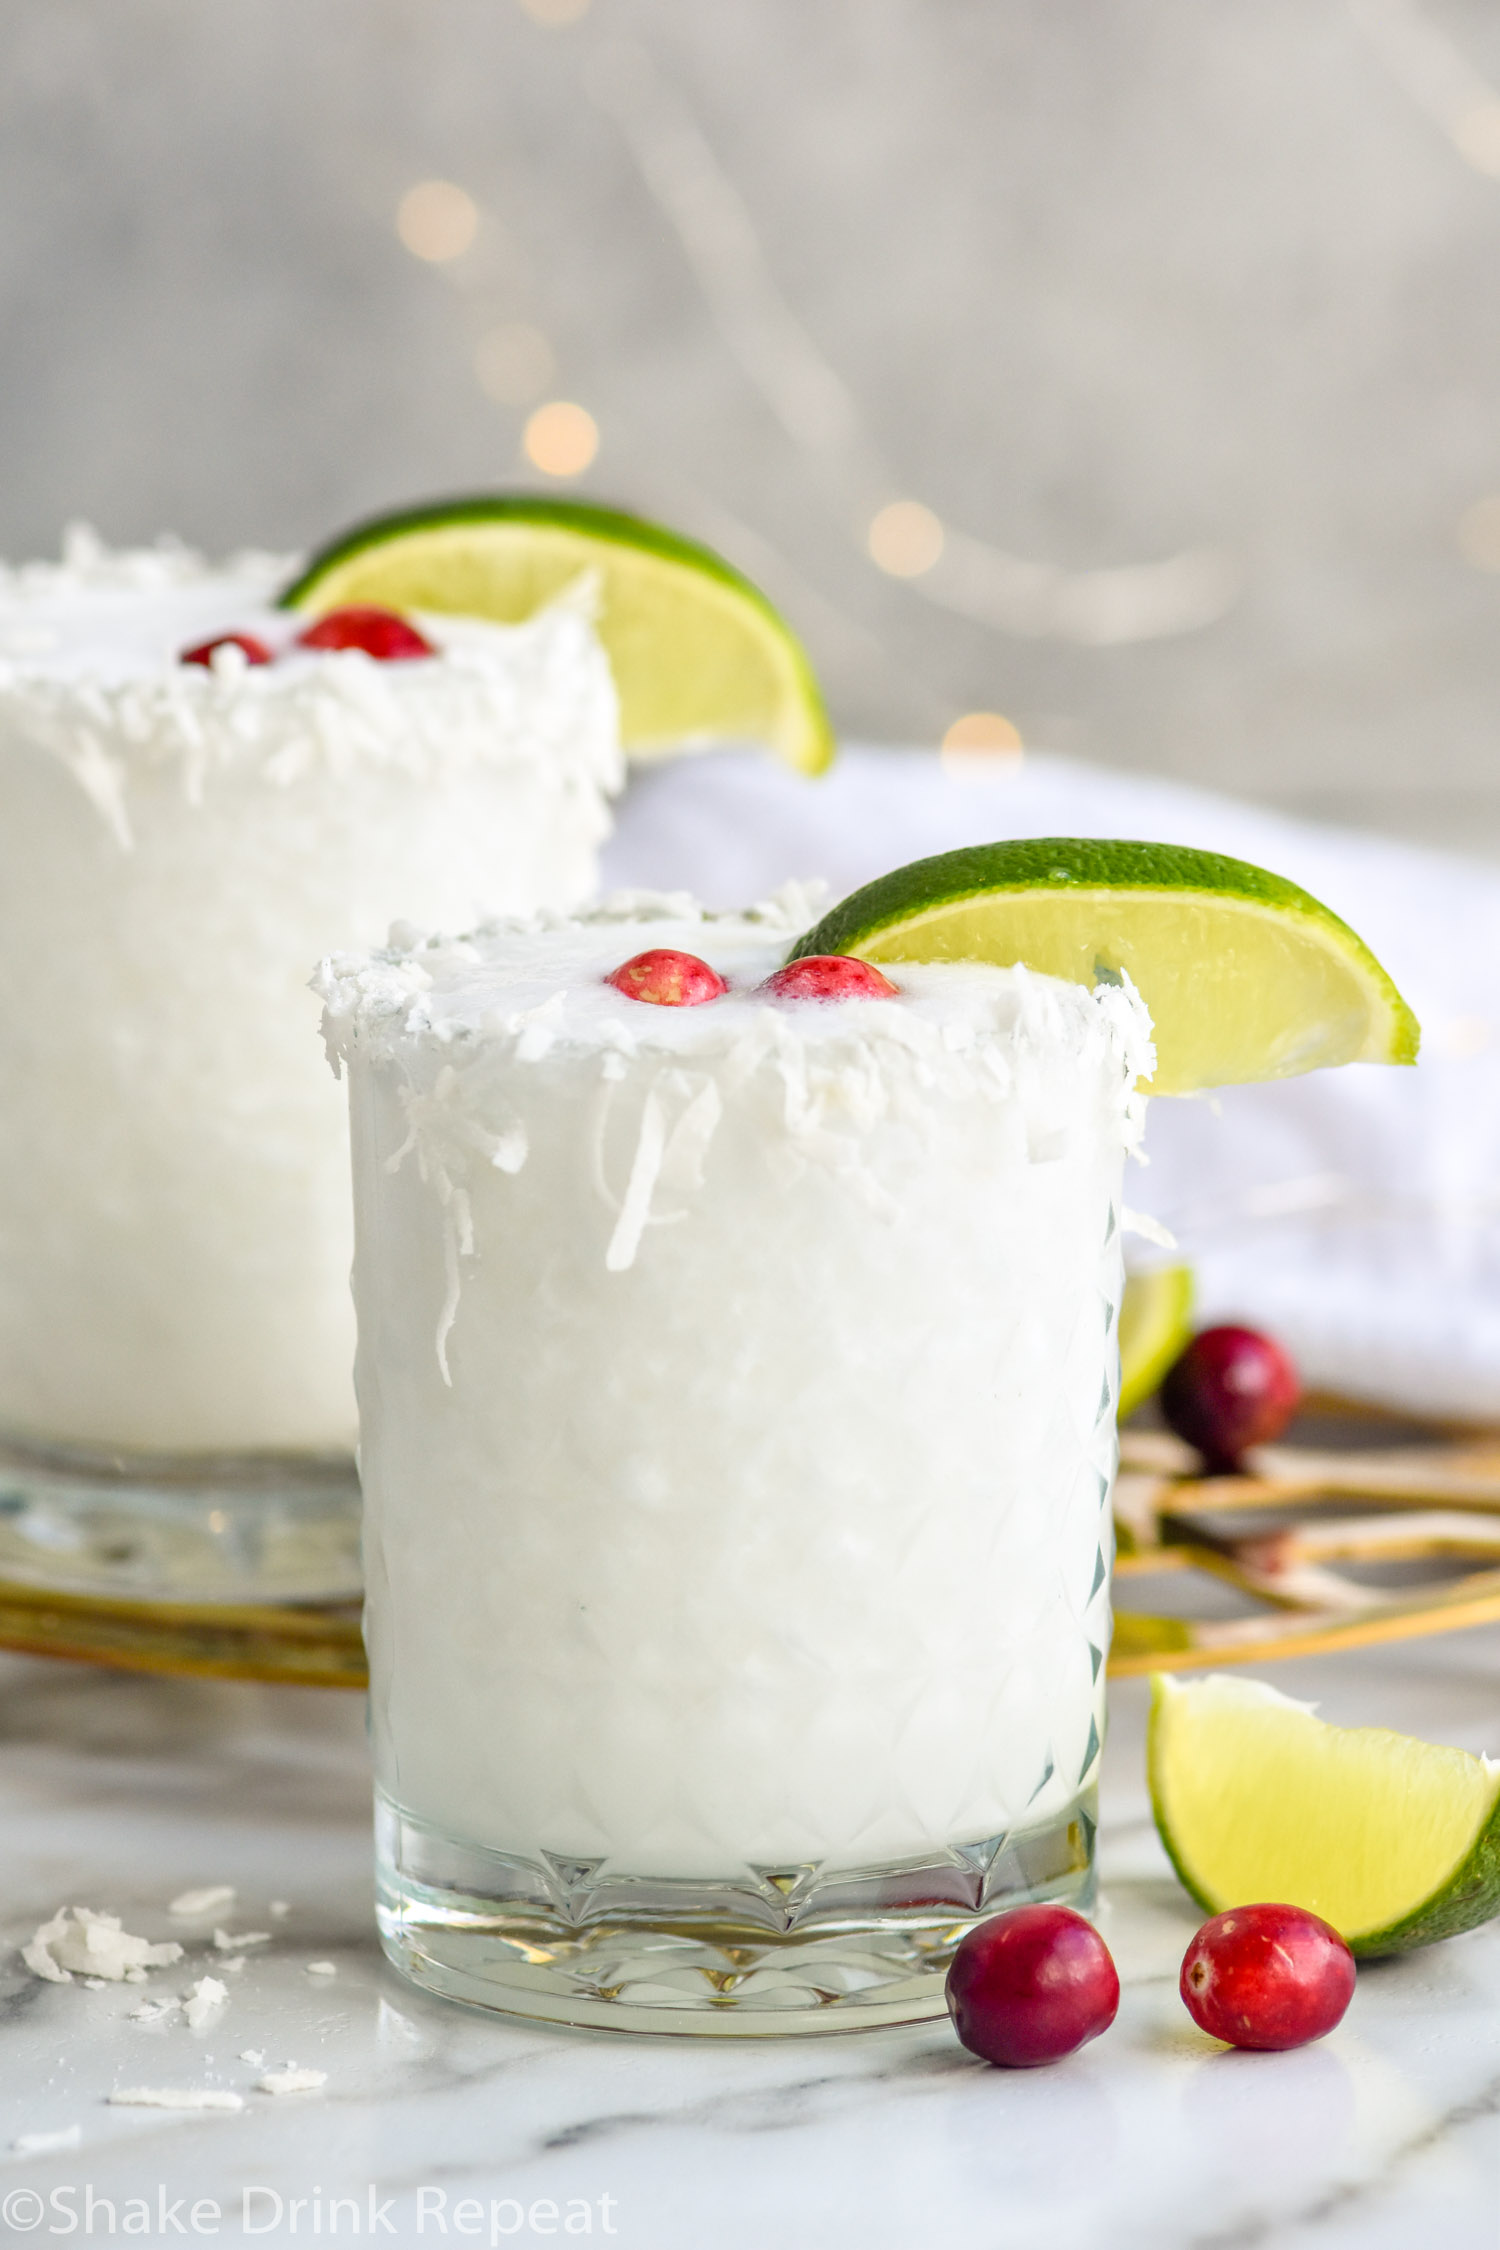 Front facing photo of White Christmas Margarita with cranberries and a lime wedge garnish and extras around the glass with another margarita glass in the background.